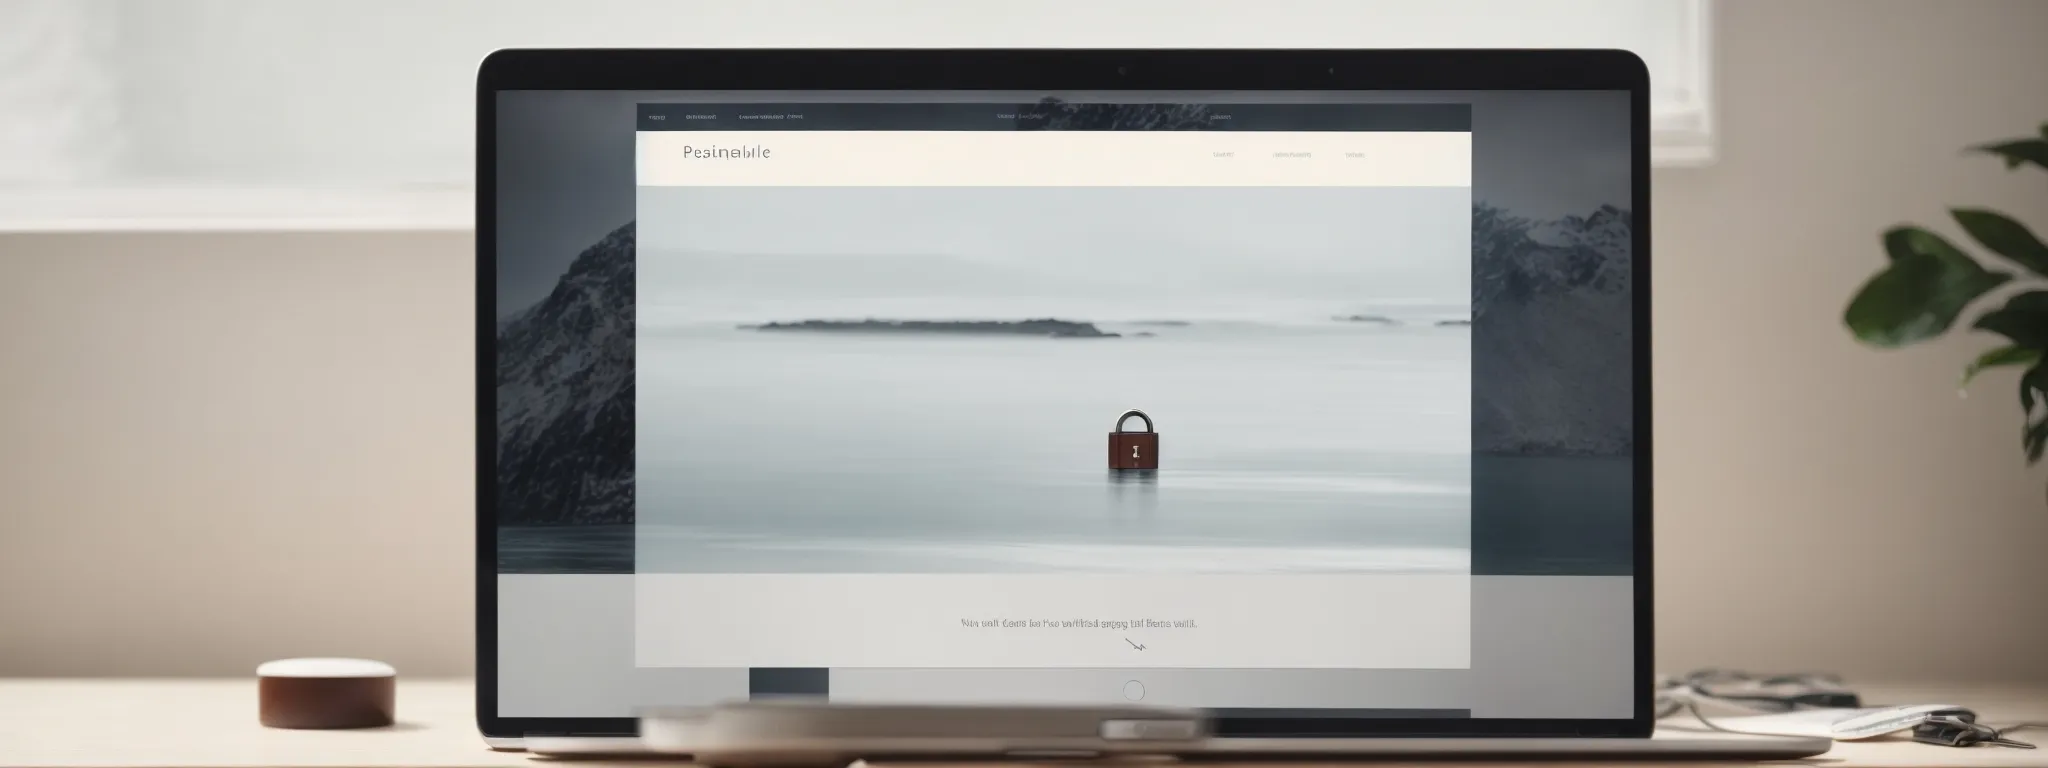 a minimalist website interface displays a secure lock icon next to the url within an elegant browser window.